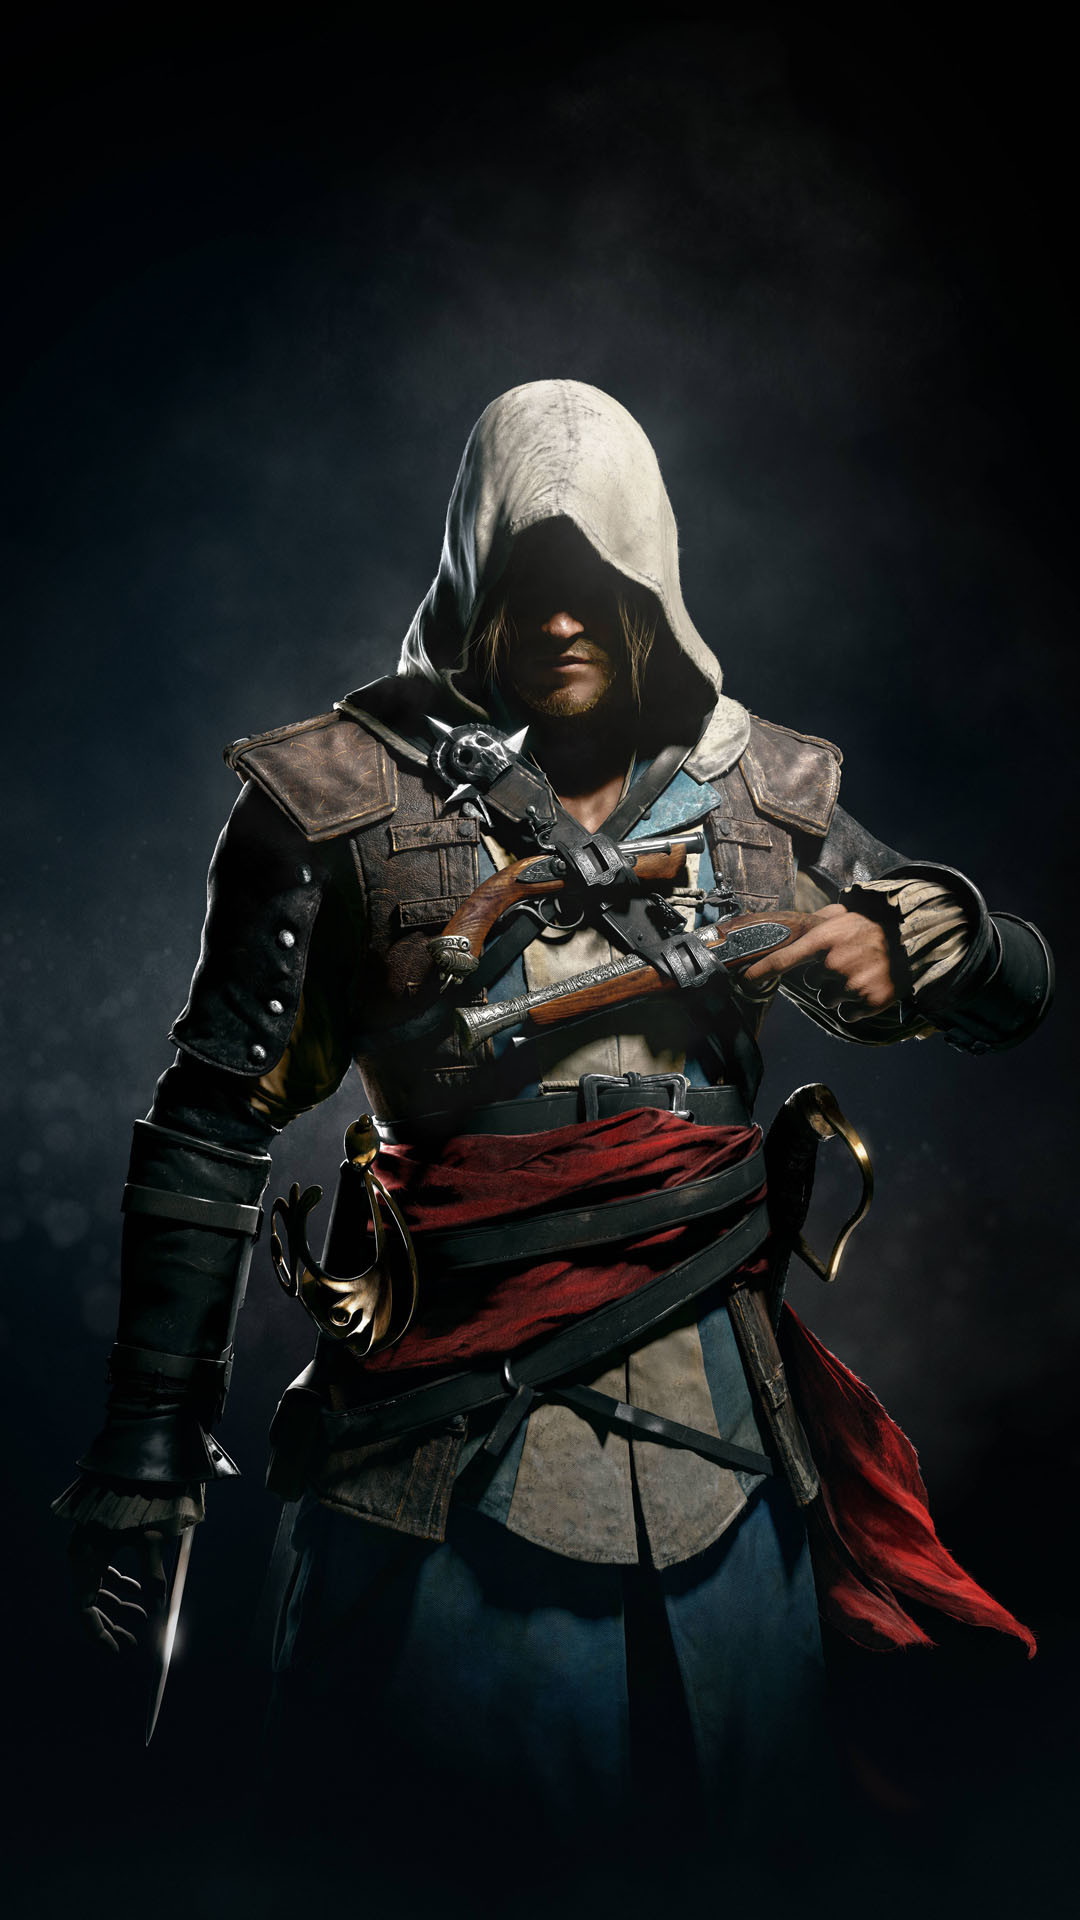 1080x1920 Download Free Assassin's Creed Wallpaper for Iphone.